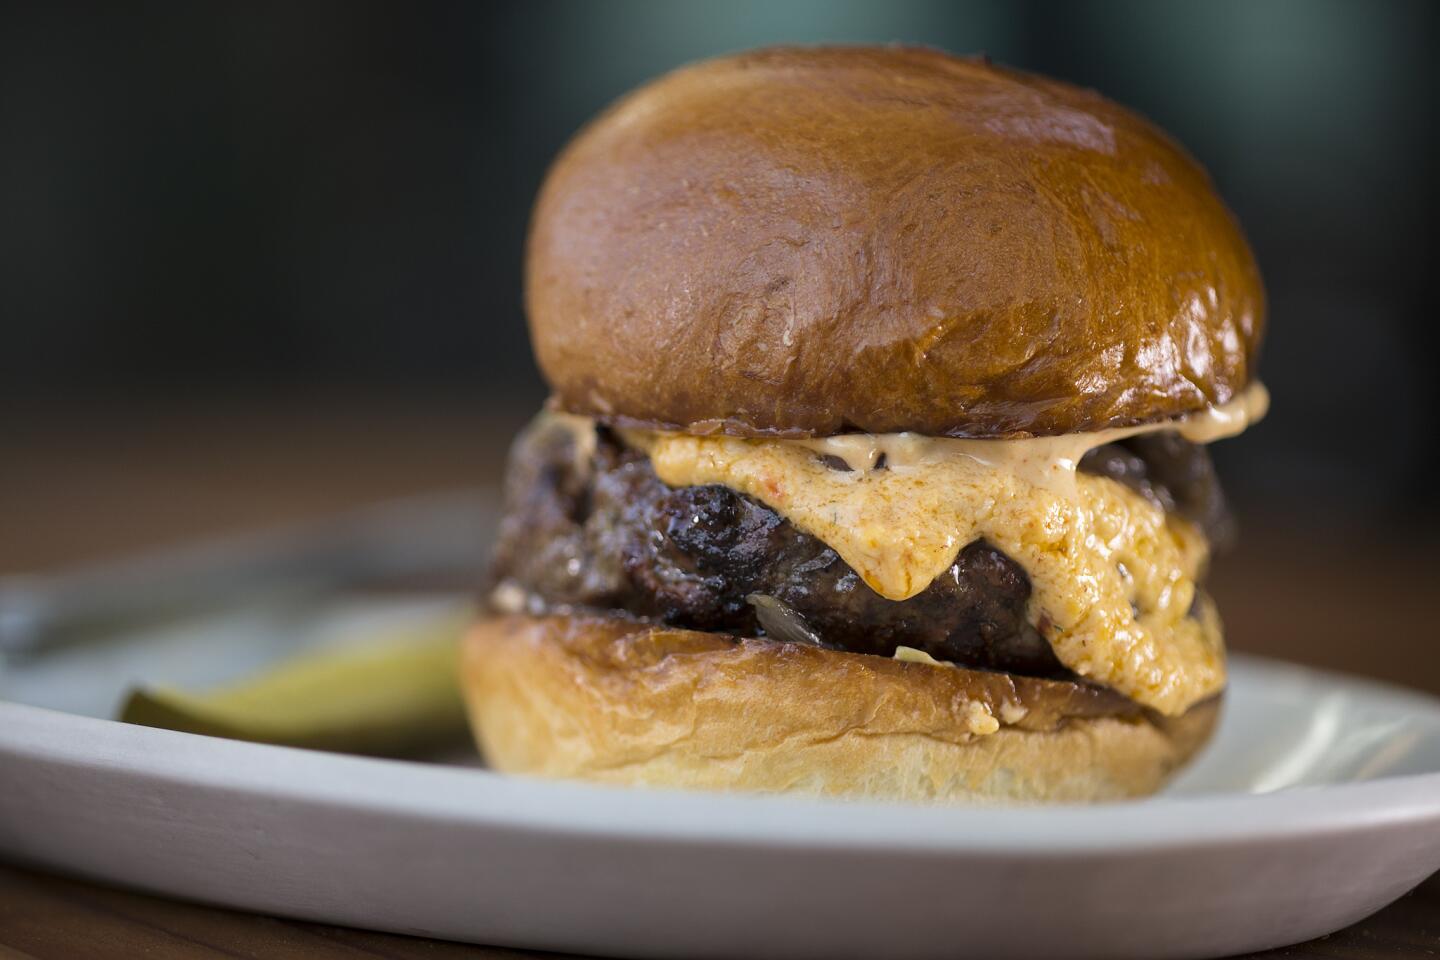 The deer burger is served with pimento cheese, charred onion and spicy mayo at Manuela.